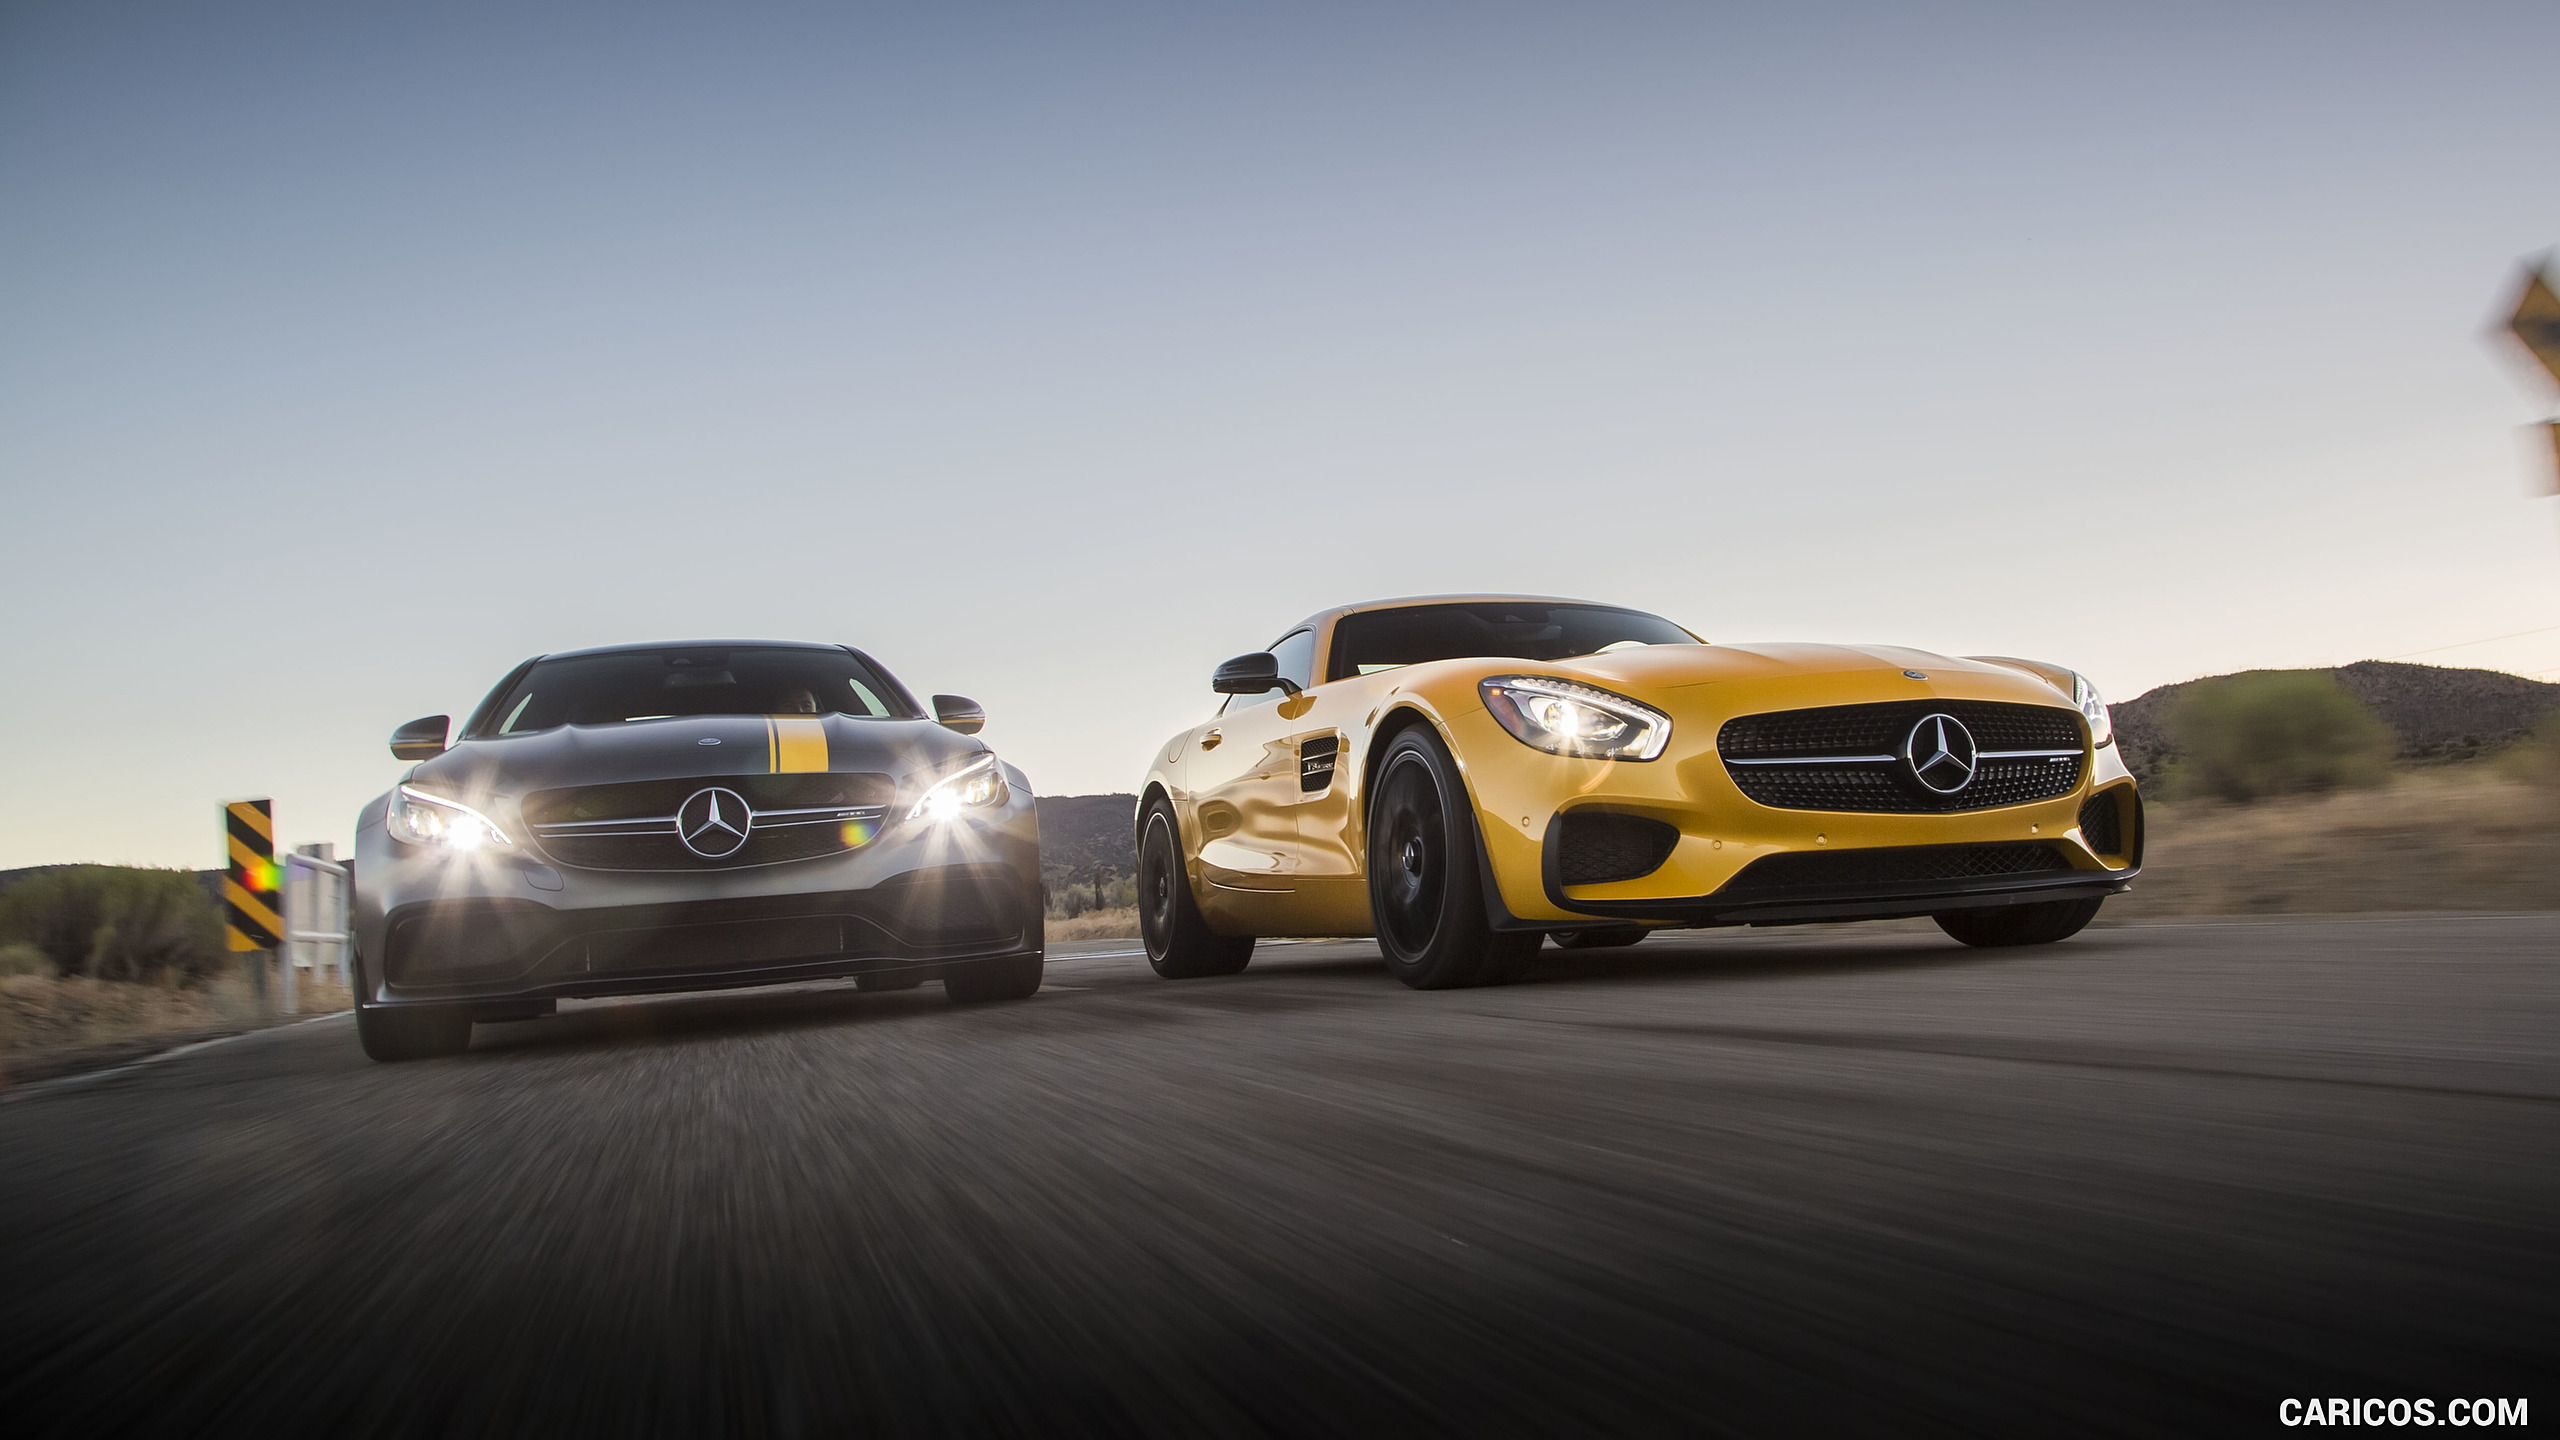 2017 Mercedes-AMG C63 S Coupe Edition One (US-Spec) and 2017 Mercedes-AMG GT S Coupe, #80 of 86